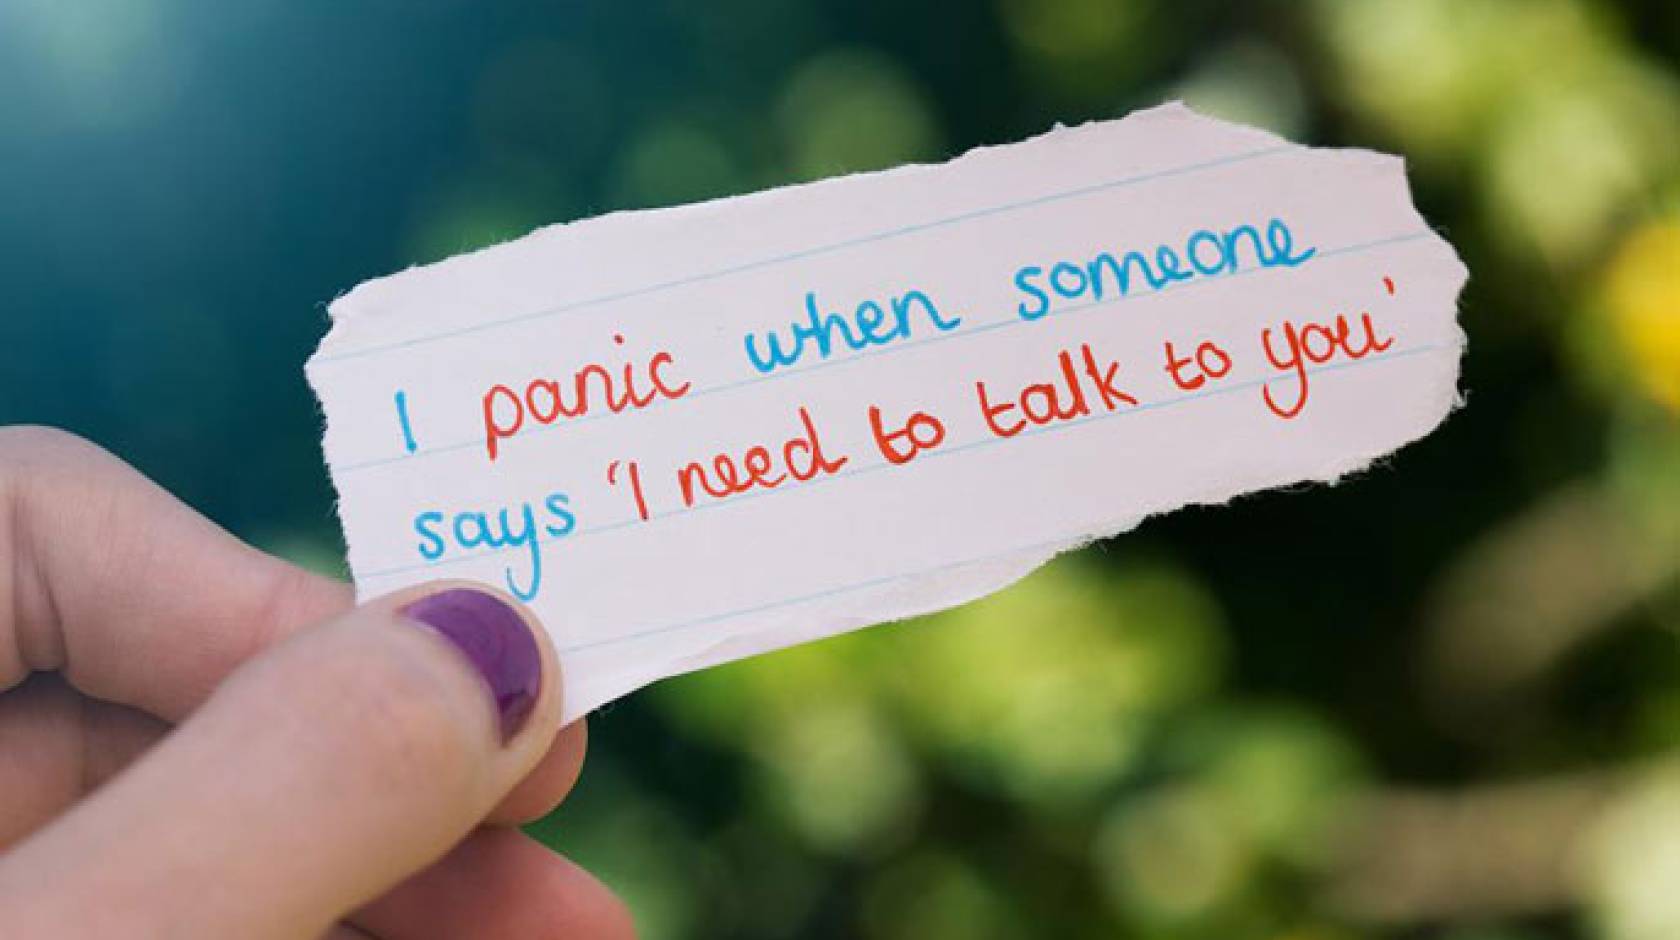 Message on paper that says I panic when someone says I need to talk to you